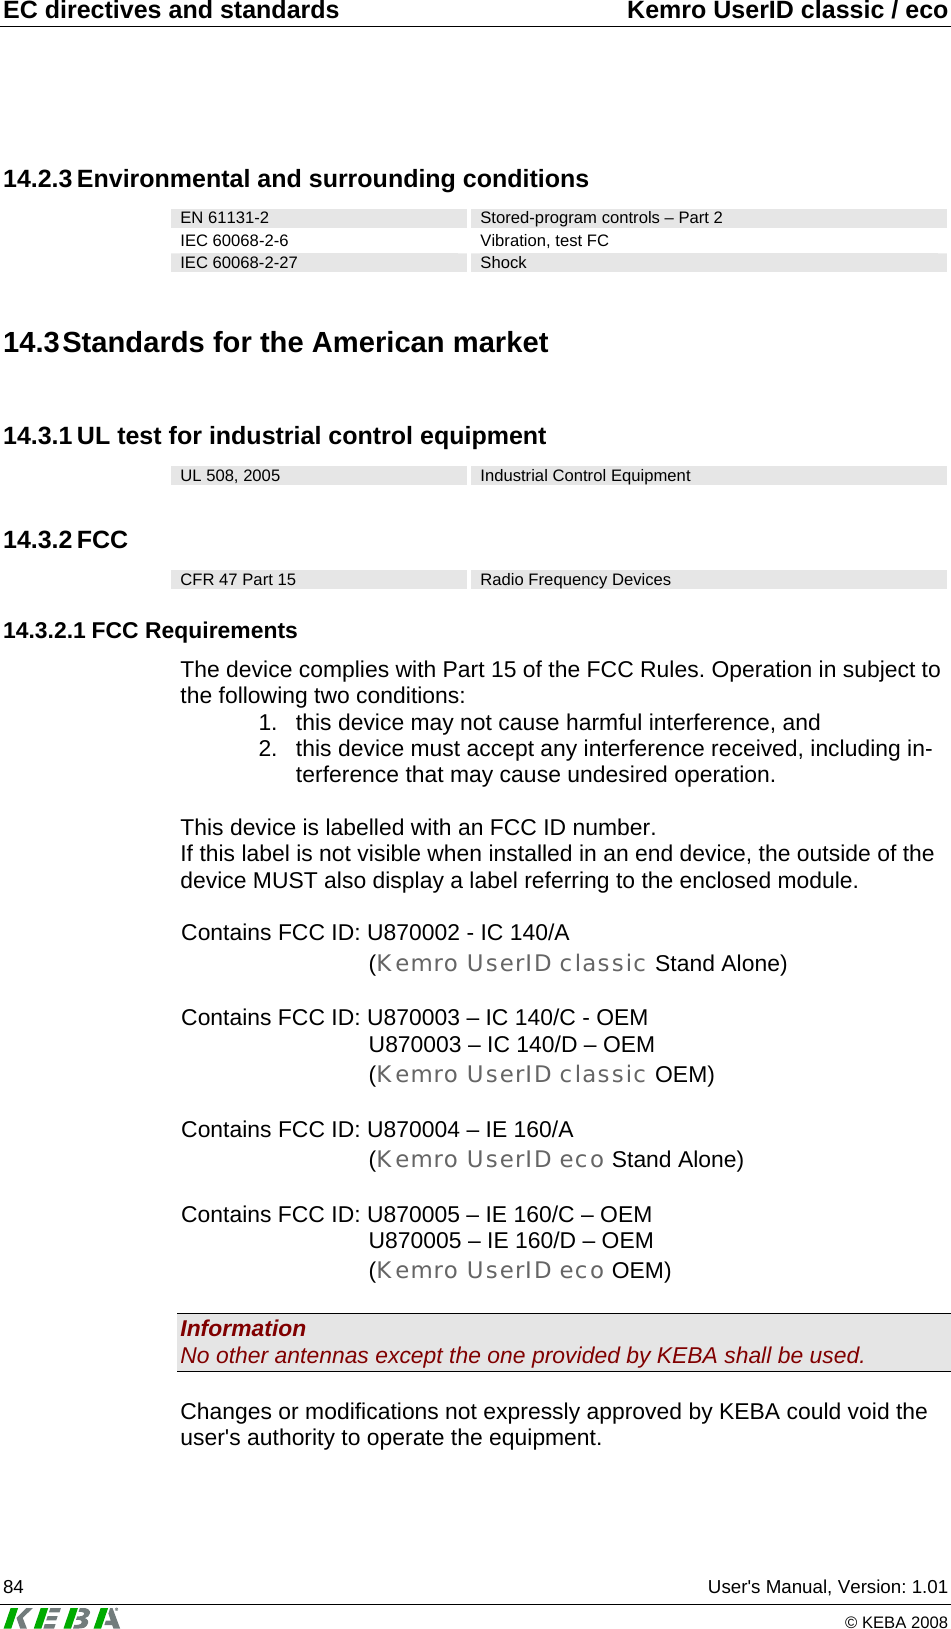 EC directives and standards  Kemro UserID classic / eco 84  User&apos;s Manual, Version: 1.01   © KEBA 2008 14.2.3 Environmental and surrounding conditions EN 61131-2  Stored-program controls – Part 2 IEC 60068-2-6  Vibration, test FC IEC 60068-2-27  Shock 14.3 Standards for the American market 14.3.1 UL test for industrial control equipment UL 508, 2005  Industrial Control Equipment 14.3.2 FCC CFR 47 Part 15  Radio Frequency Devices 14.3.2.1 FCC Requirements The device complies with Part 15 of the FCC Rules. Operation in subject to the following two conditions: 1.  this device may not cause harmful interference, and 2.  this device must accept any interference received, including in-terference that may cause undesired operation.  This device is labelled with an FCC ID number. If this label is not visible when installed in an end device, the outside of the device MUST also display a label referring to the enclosed module.  Contains FCC ID: U870002 - IC 140/A (Kemro UserID classic Stand Alone)  Contains FCC ID: U870003 – IC 140/C - OEM U870003 – IC 140/D – OEM (Kemro UserID classic OEM)  Contains FCC ID: U870004 – IE 160/A (Kemro UserID eco Stand Alone)  Contains FCC ID: U870005 – IE 160/C – OEM U870005 – IE 160/D – OEM (Kemro UserID eco OEM)  Information No other antennas except the one provided by KEBA shall be used.  Changes or modifications not expressly approved by KEBA could void the user&apos;s authority to operate the equipment. 